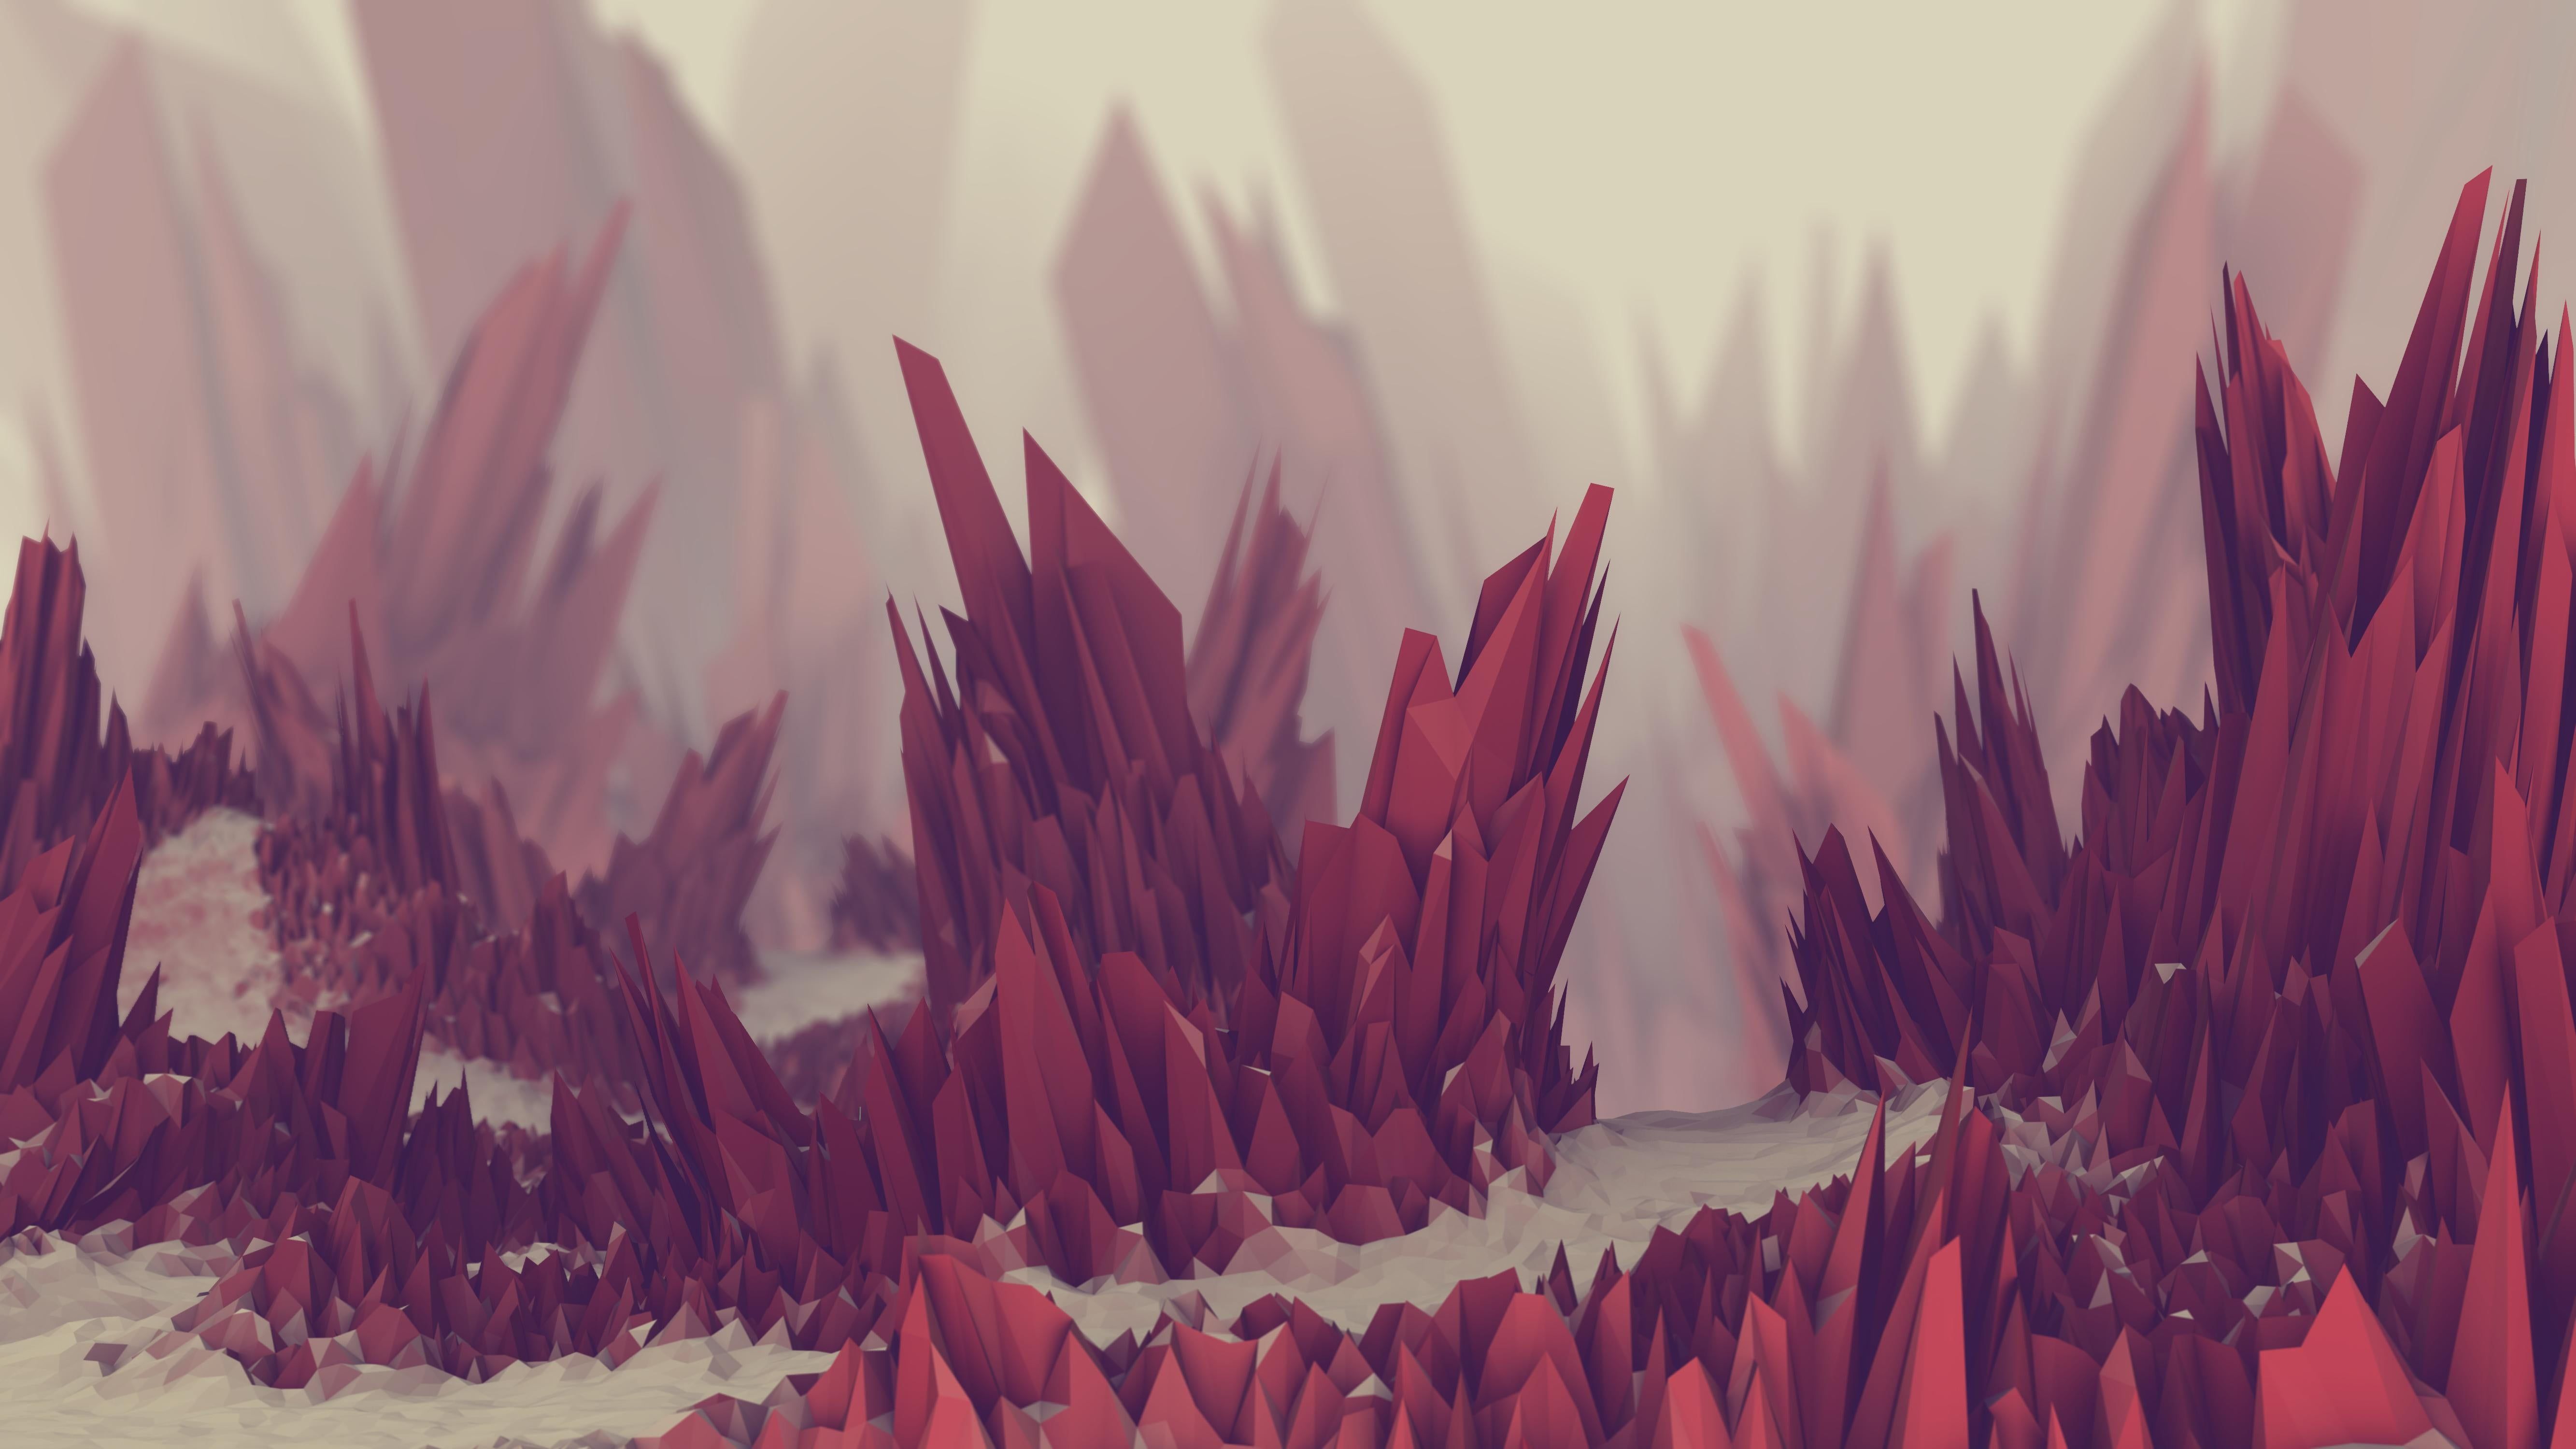 A mountain range covered in red rock formations - Low poly